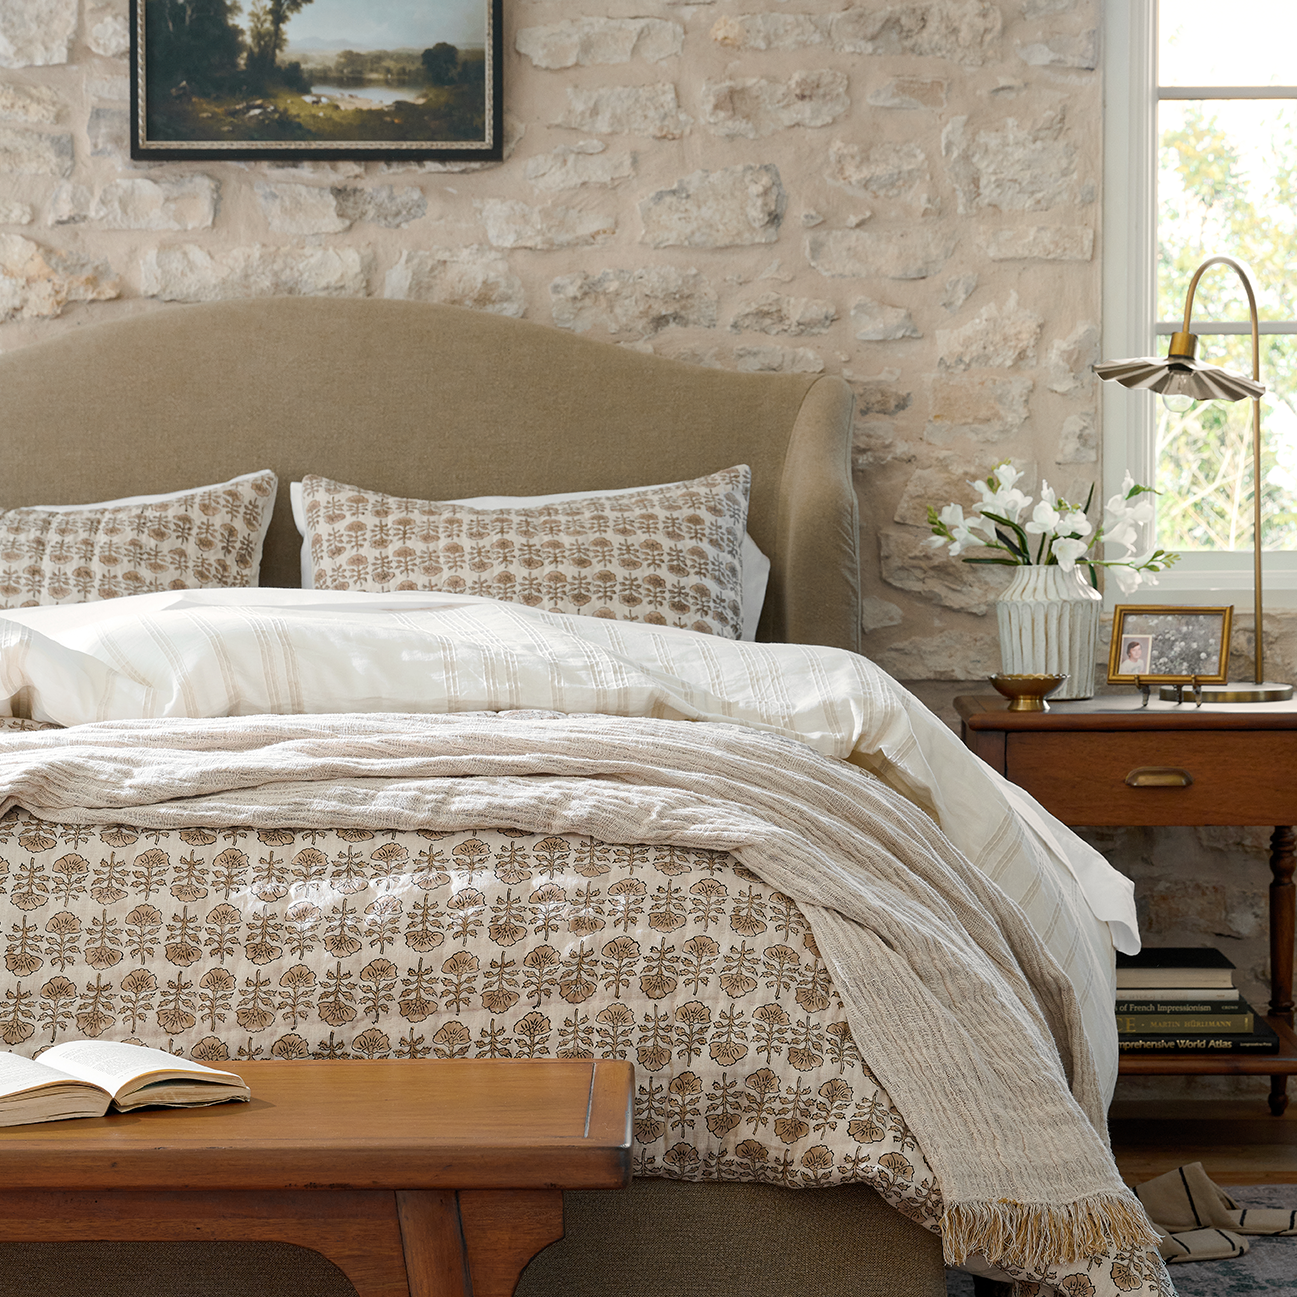 Block print bedding from Magnolia dresses a bed.